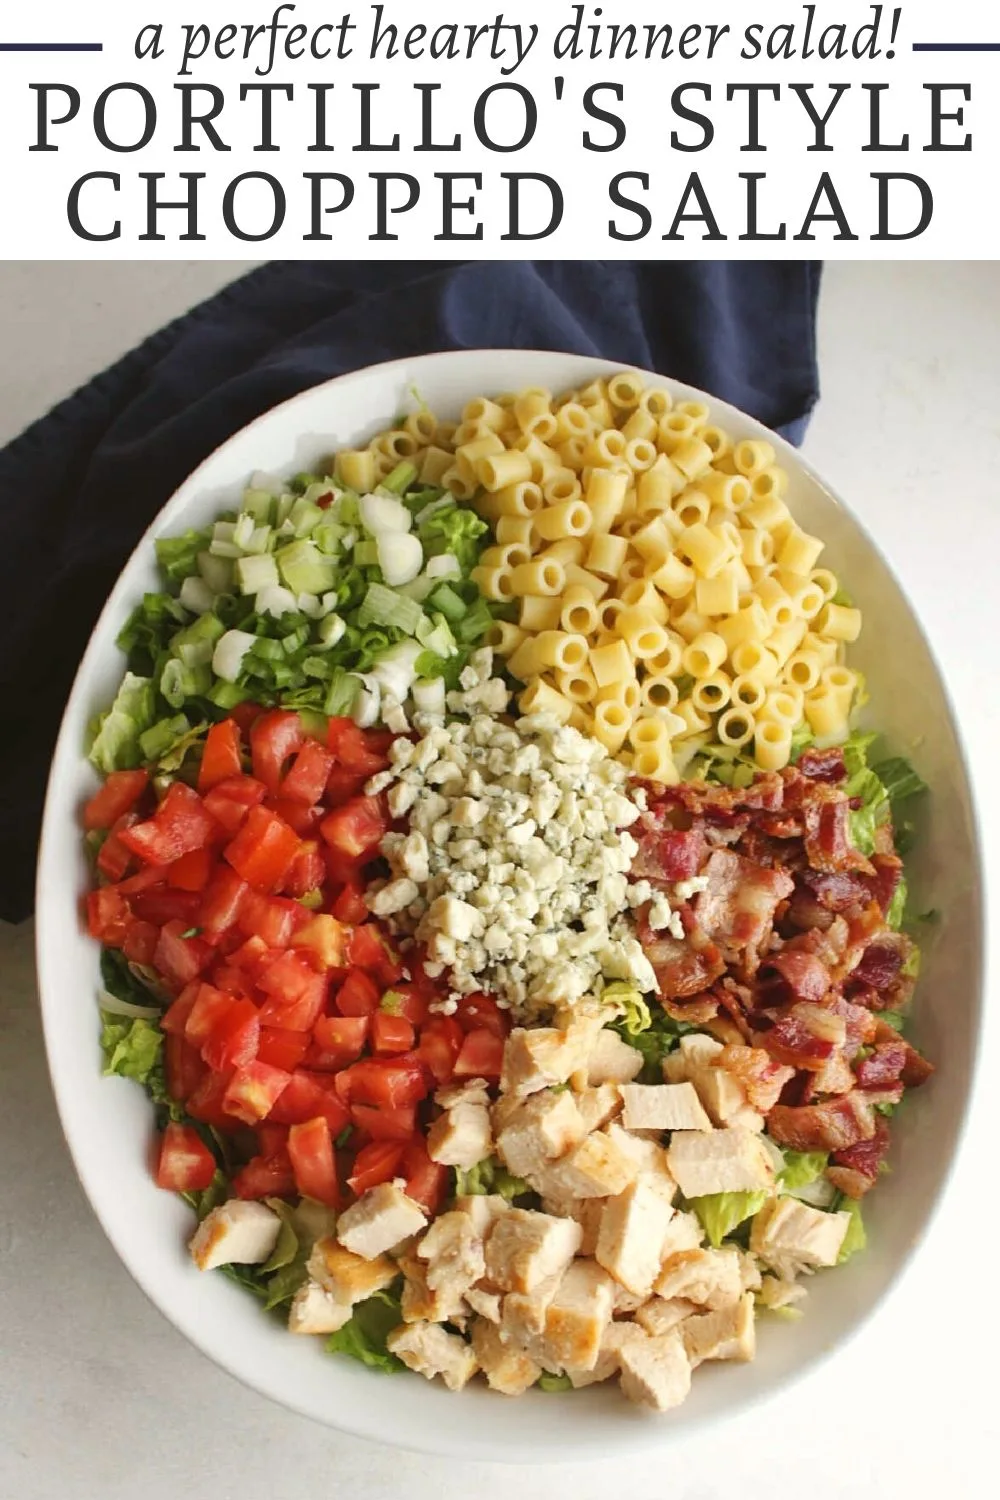 This Portillo's style chopped salad is a lot like what you would get at the restaurant. It is hearty and full of flavor. With bacon, chicken, pasta, tomatoes, and cheese it is sure to win you over.